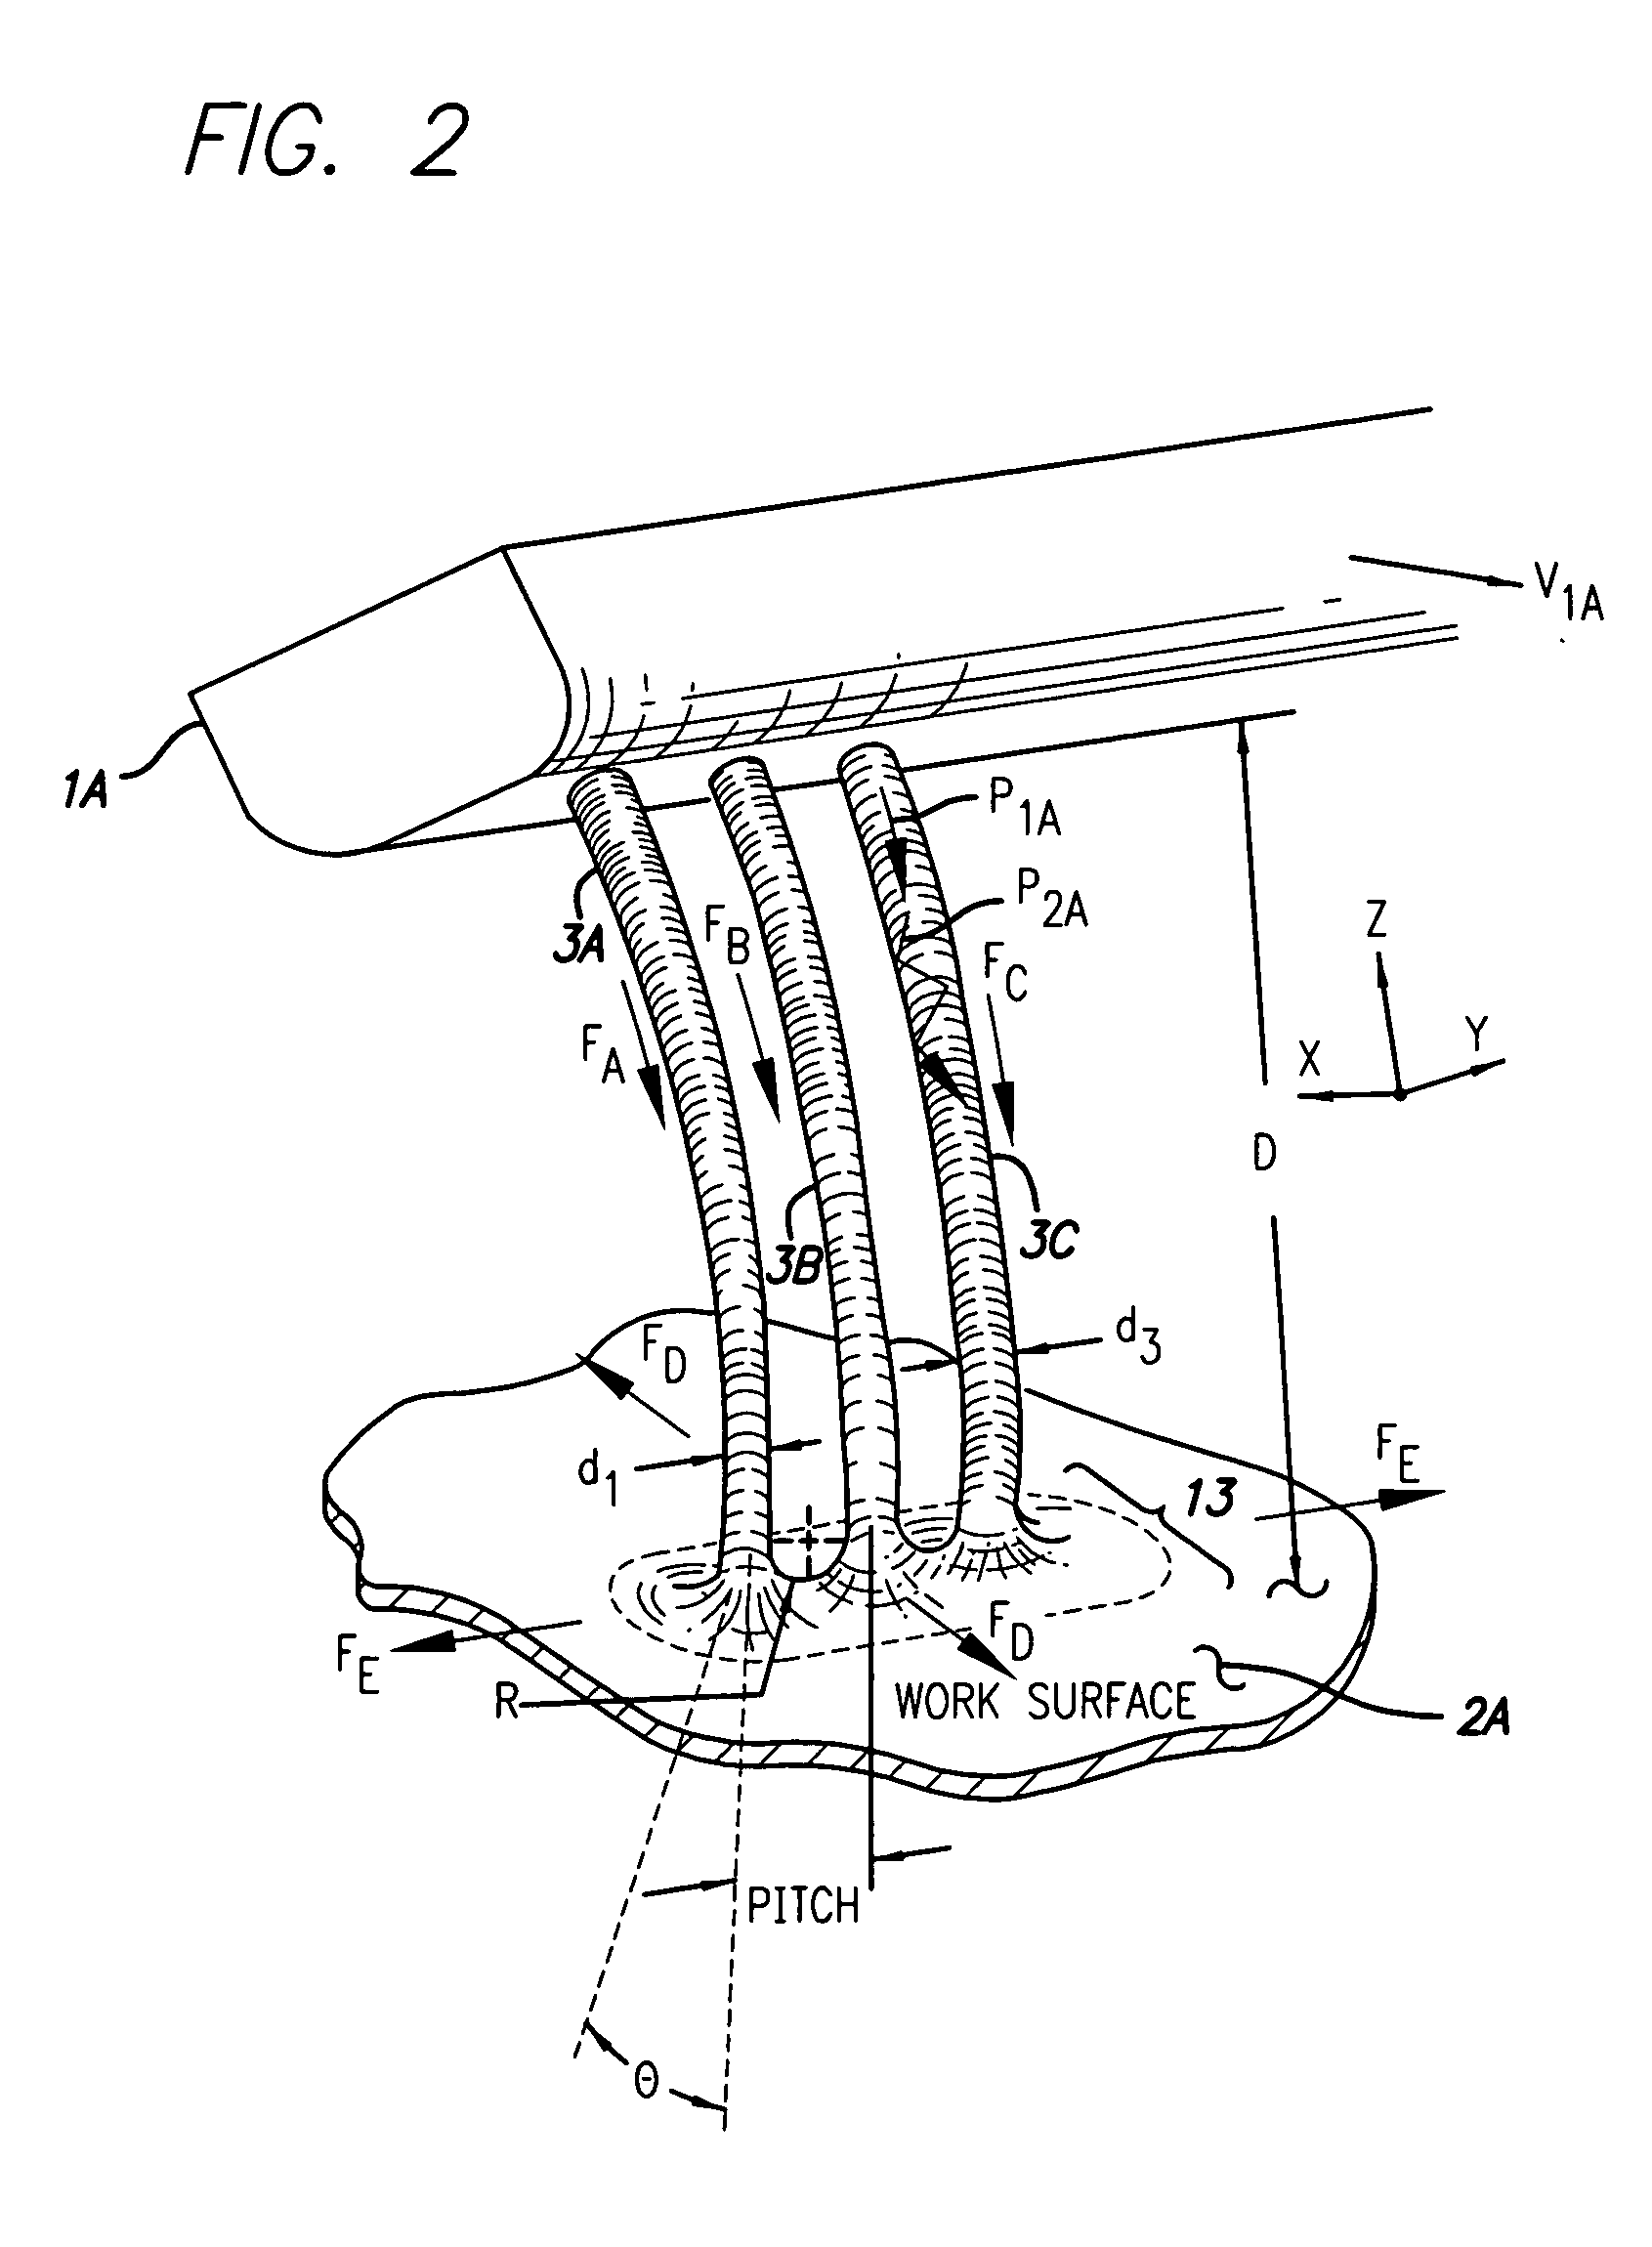 Apparatus and method for delivering acoustic energy through a liquid stream to a target object for disruptive surface cleaning or treating effects